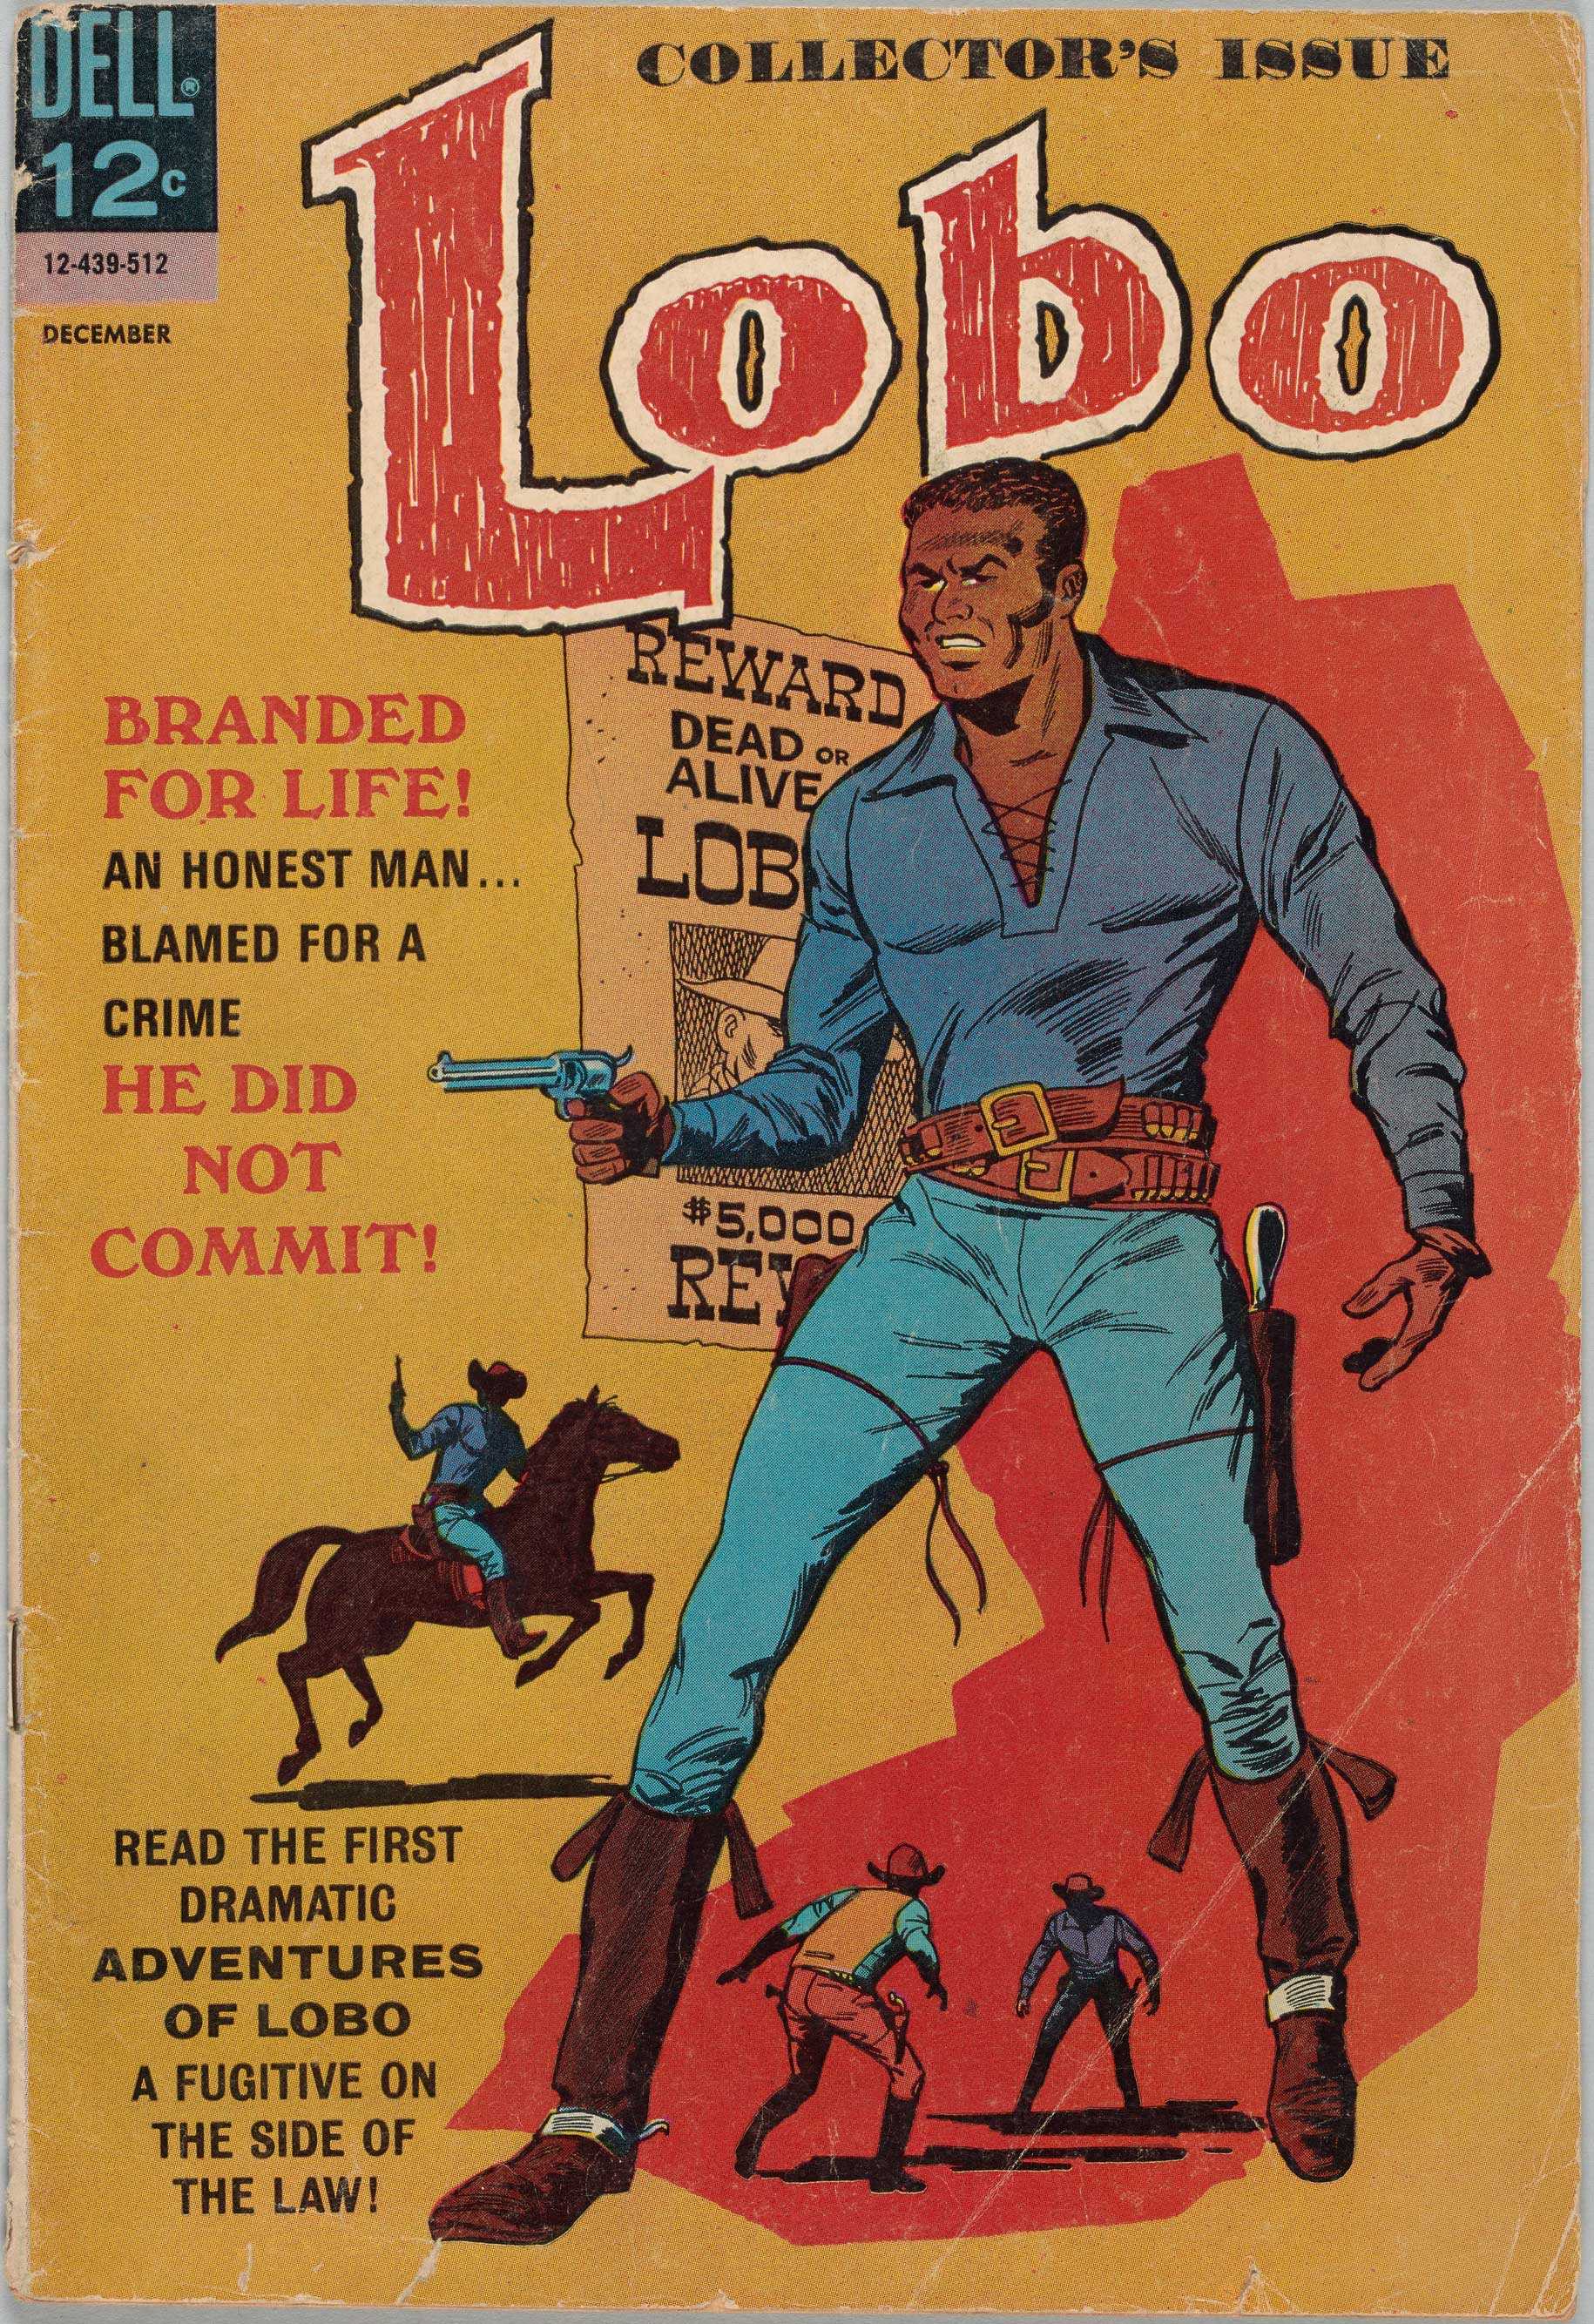 The front cover of the magazine is predominately yellow, red, and blue. Lobo is centered, wearing all blue with a brown ammunition belt and brown boots.